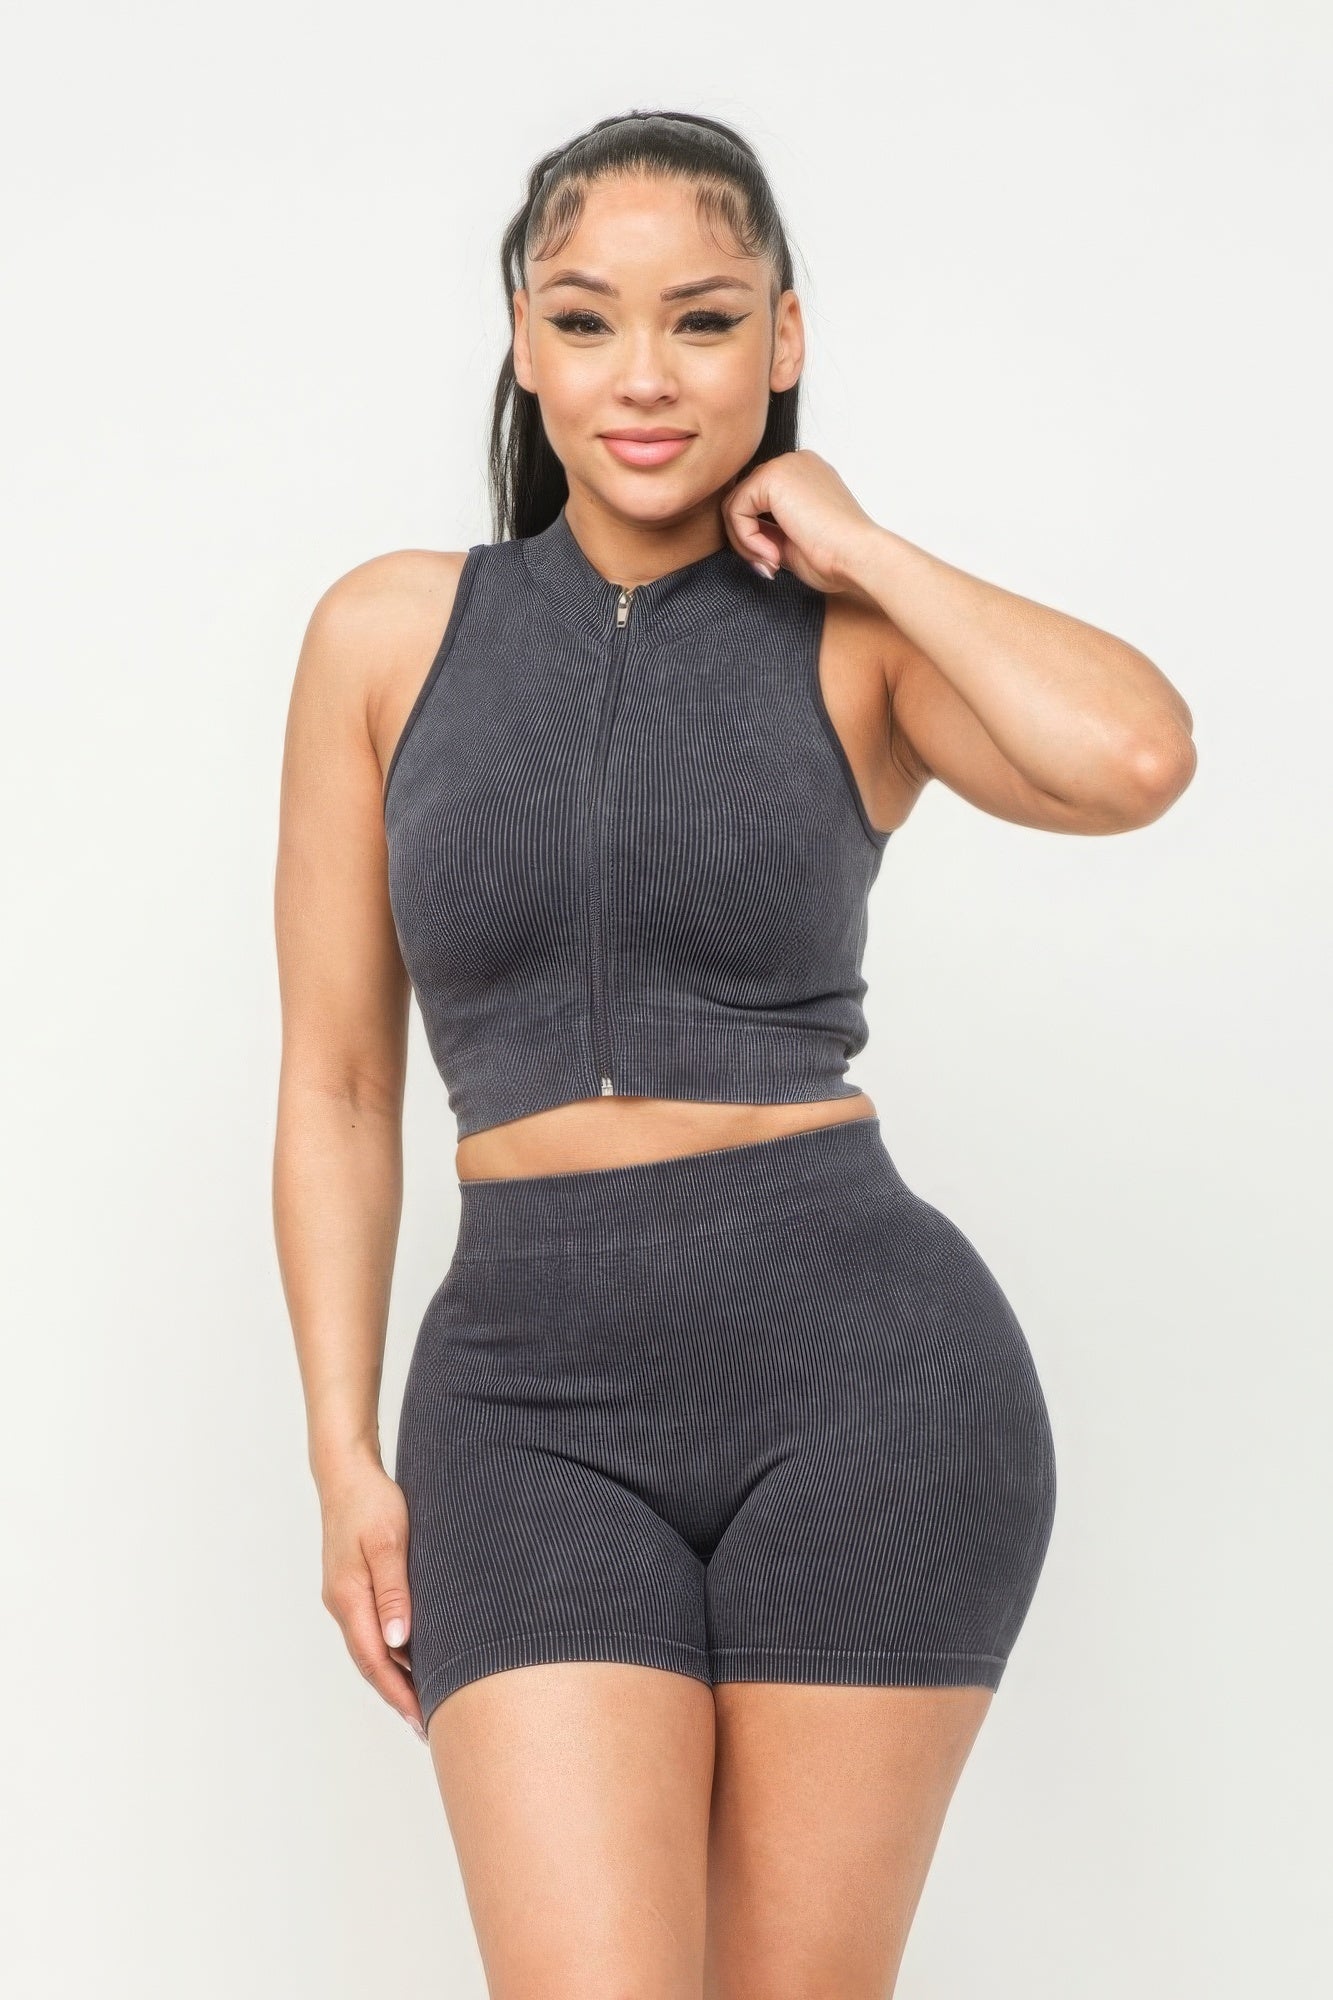 Comfy Peach Washed Seamless Zipper Top And Shorts Set